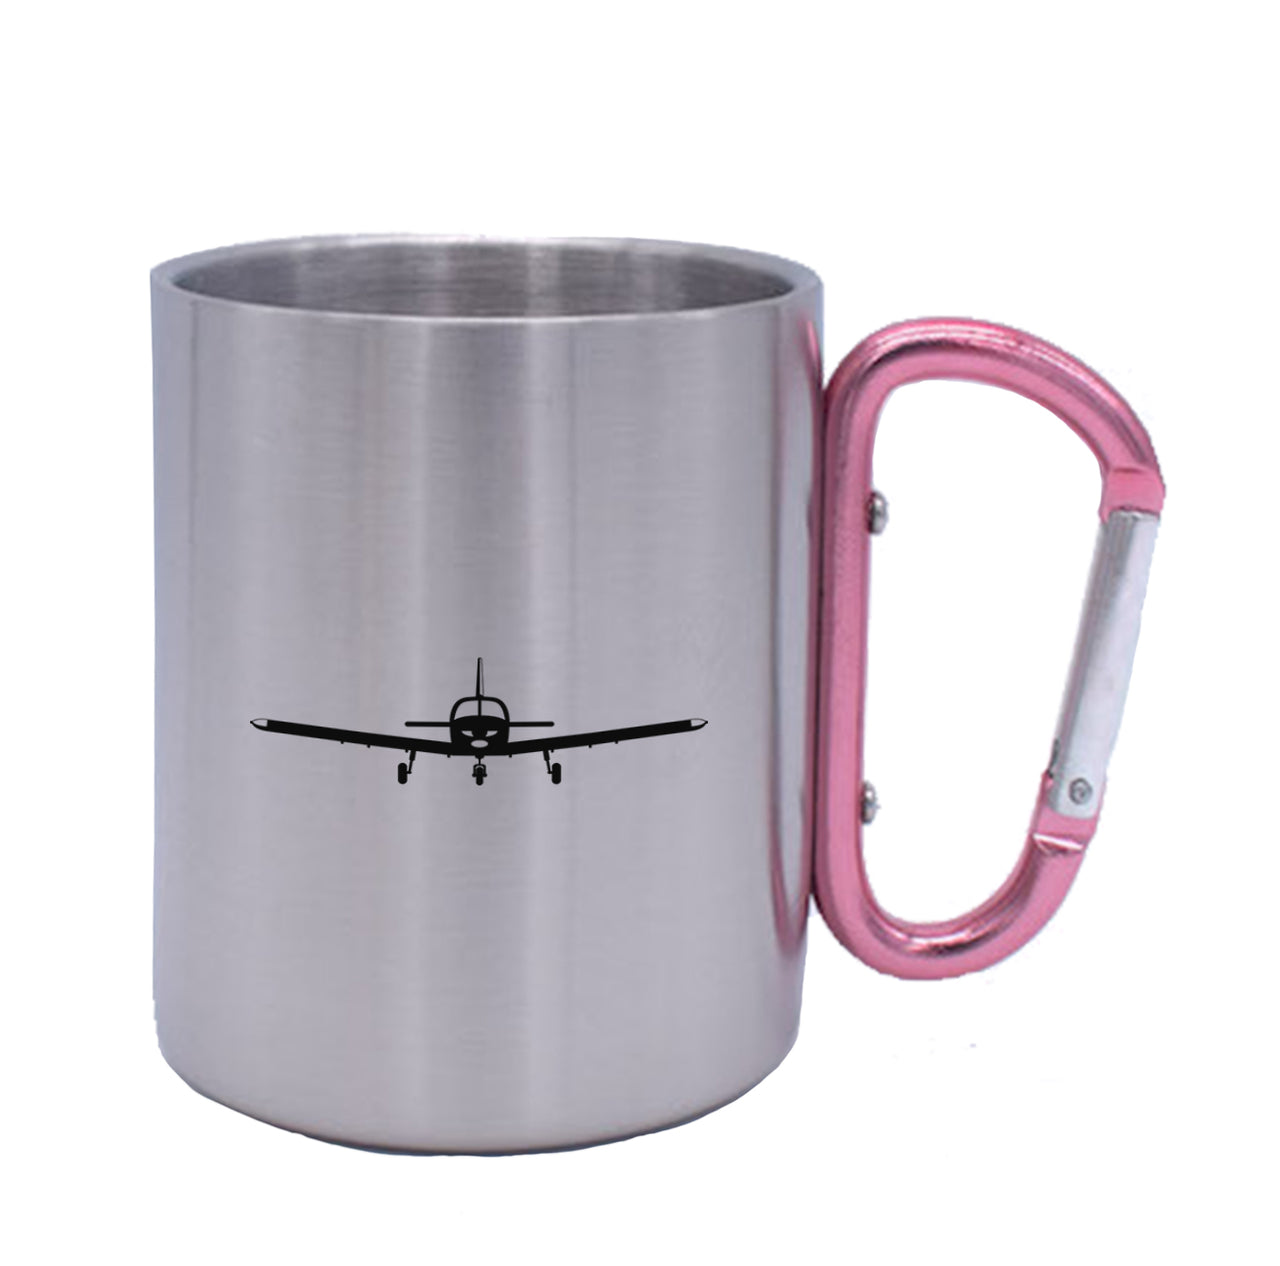 Piper PA28 Silhouette Plane Designed Stainless Steel Outdoors Mugs